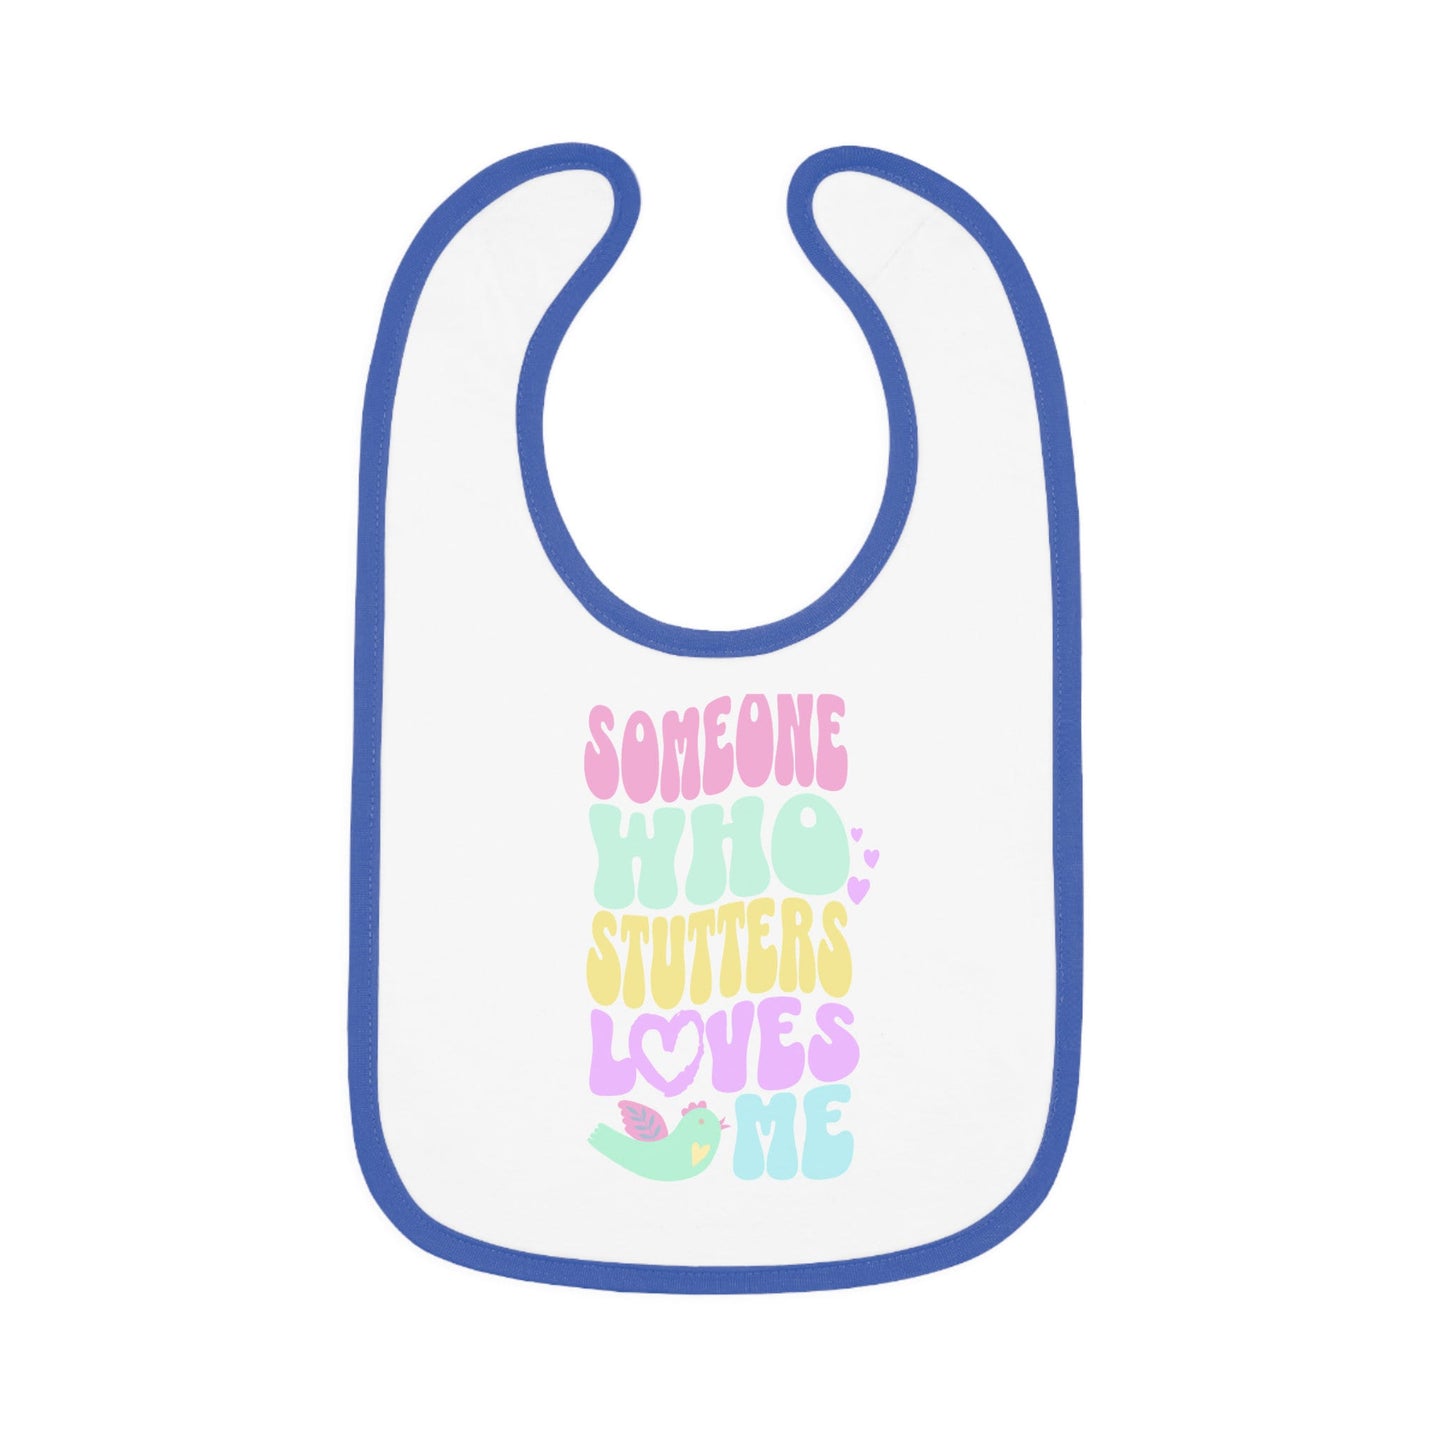 Someone Who Stutters Loves Me Baby Bib